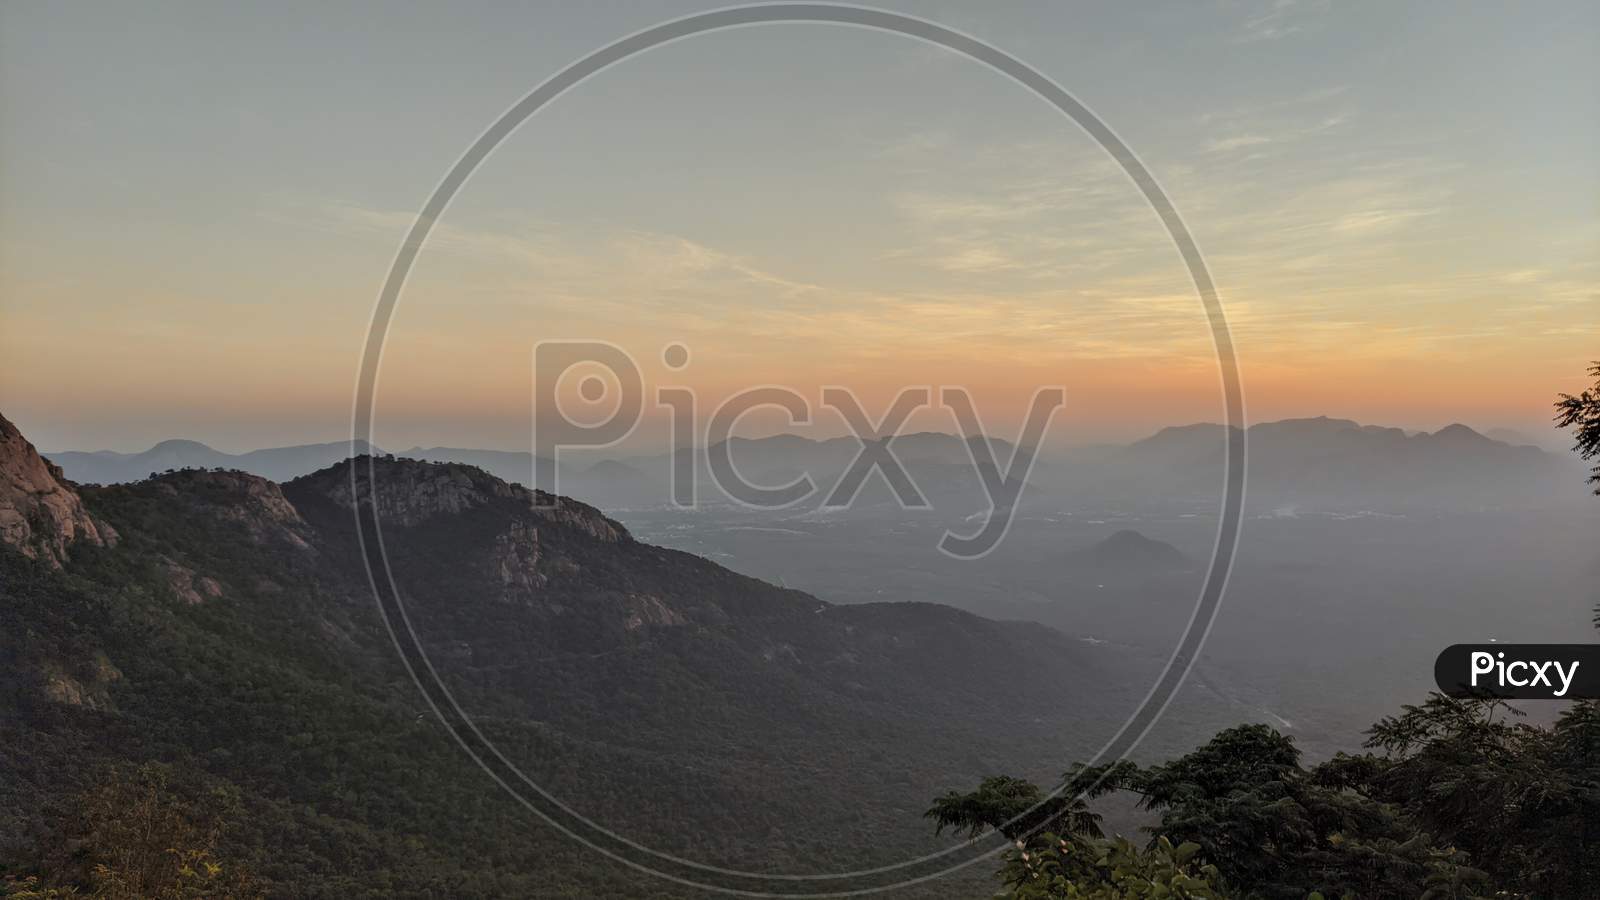 Sky and mountains, Nature photography, sunset.